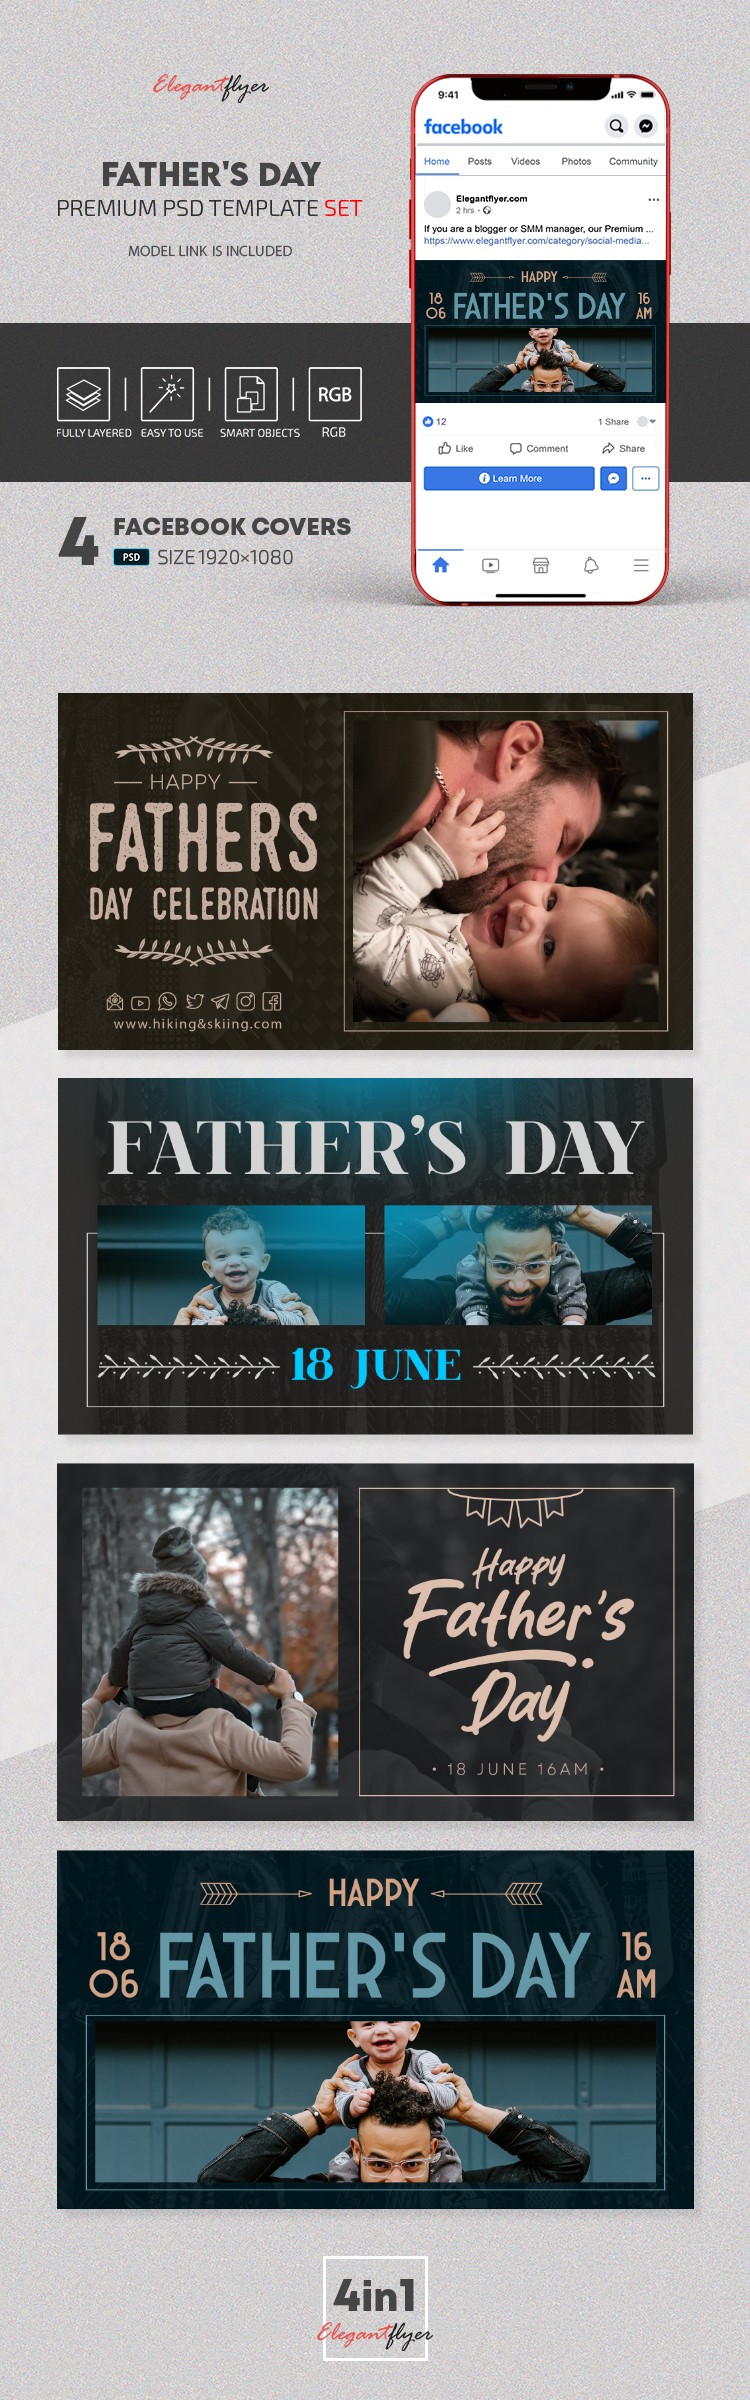 Father's Day Facebook Cover by ElegantFlyer